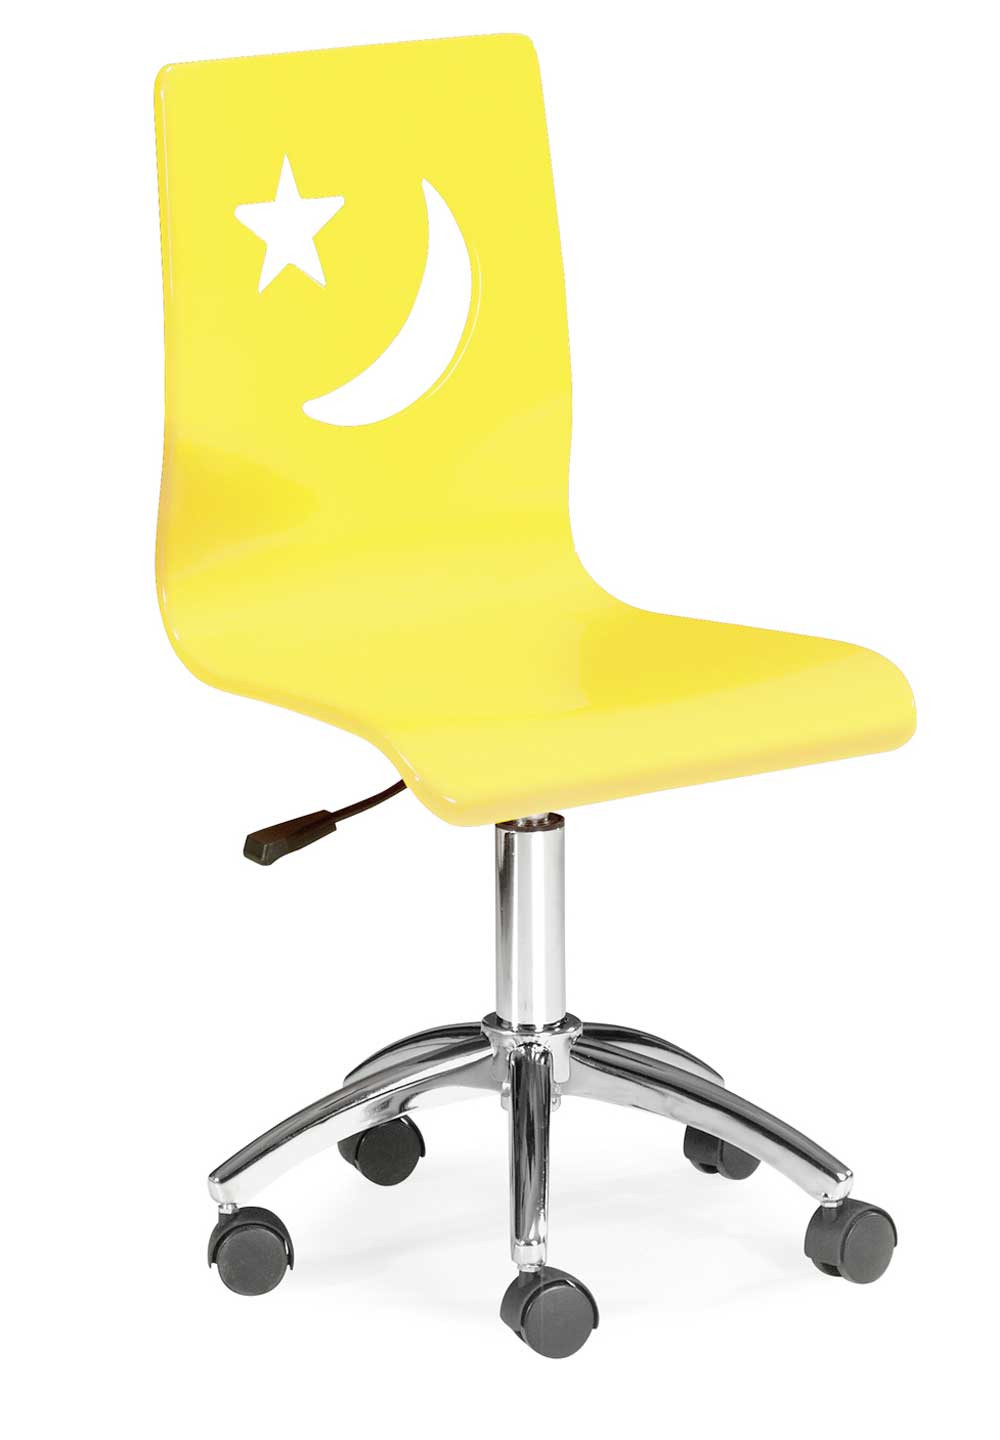 Kids Desk Chair
 Kids fice Chairs Designs and Styles Selection